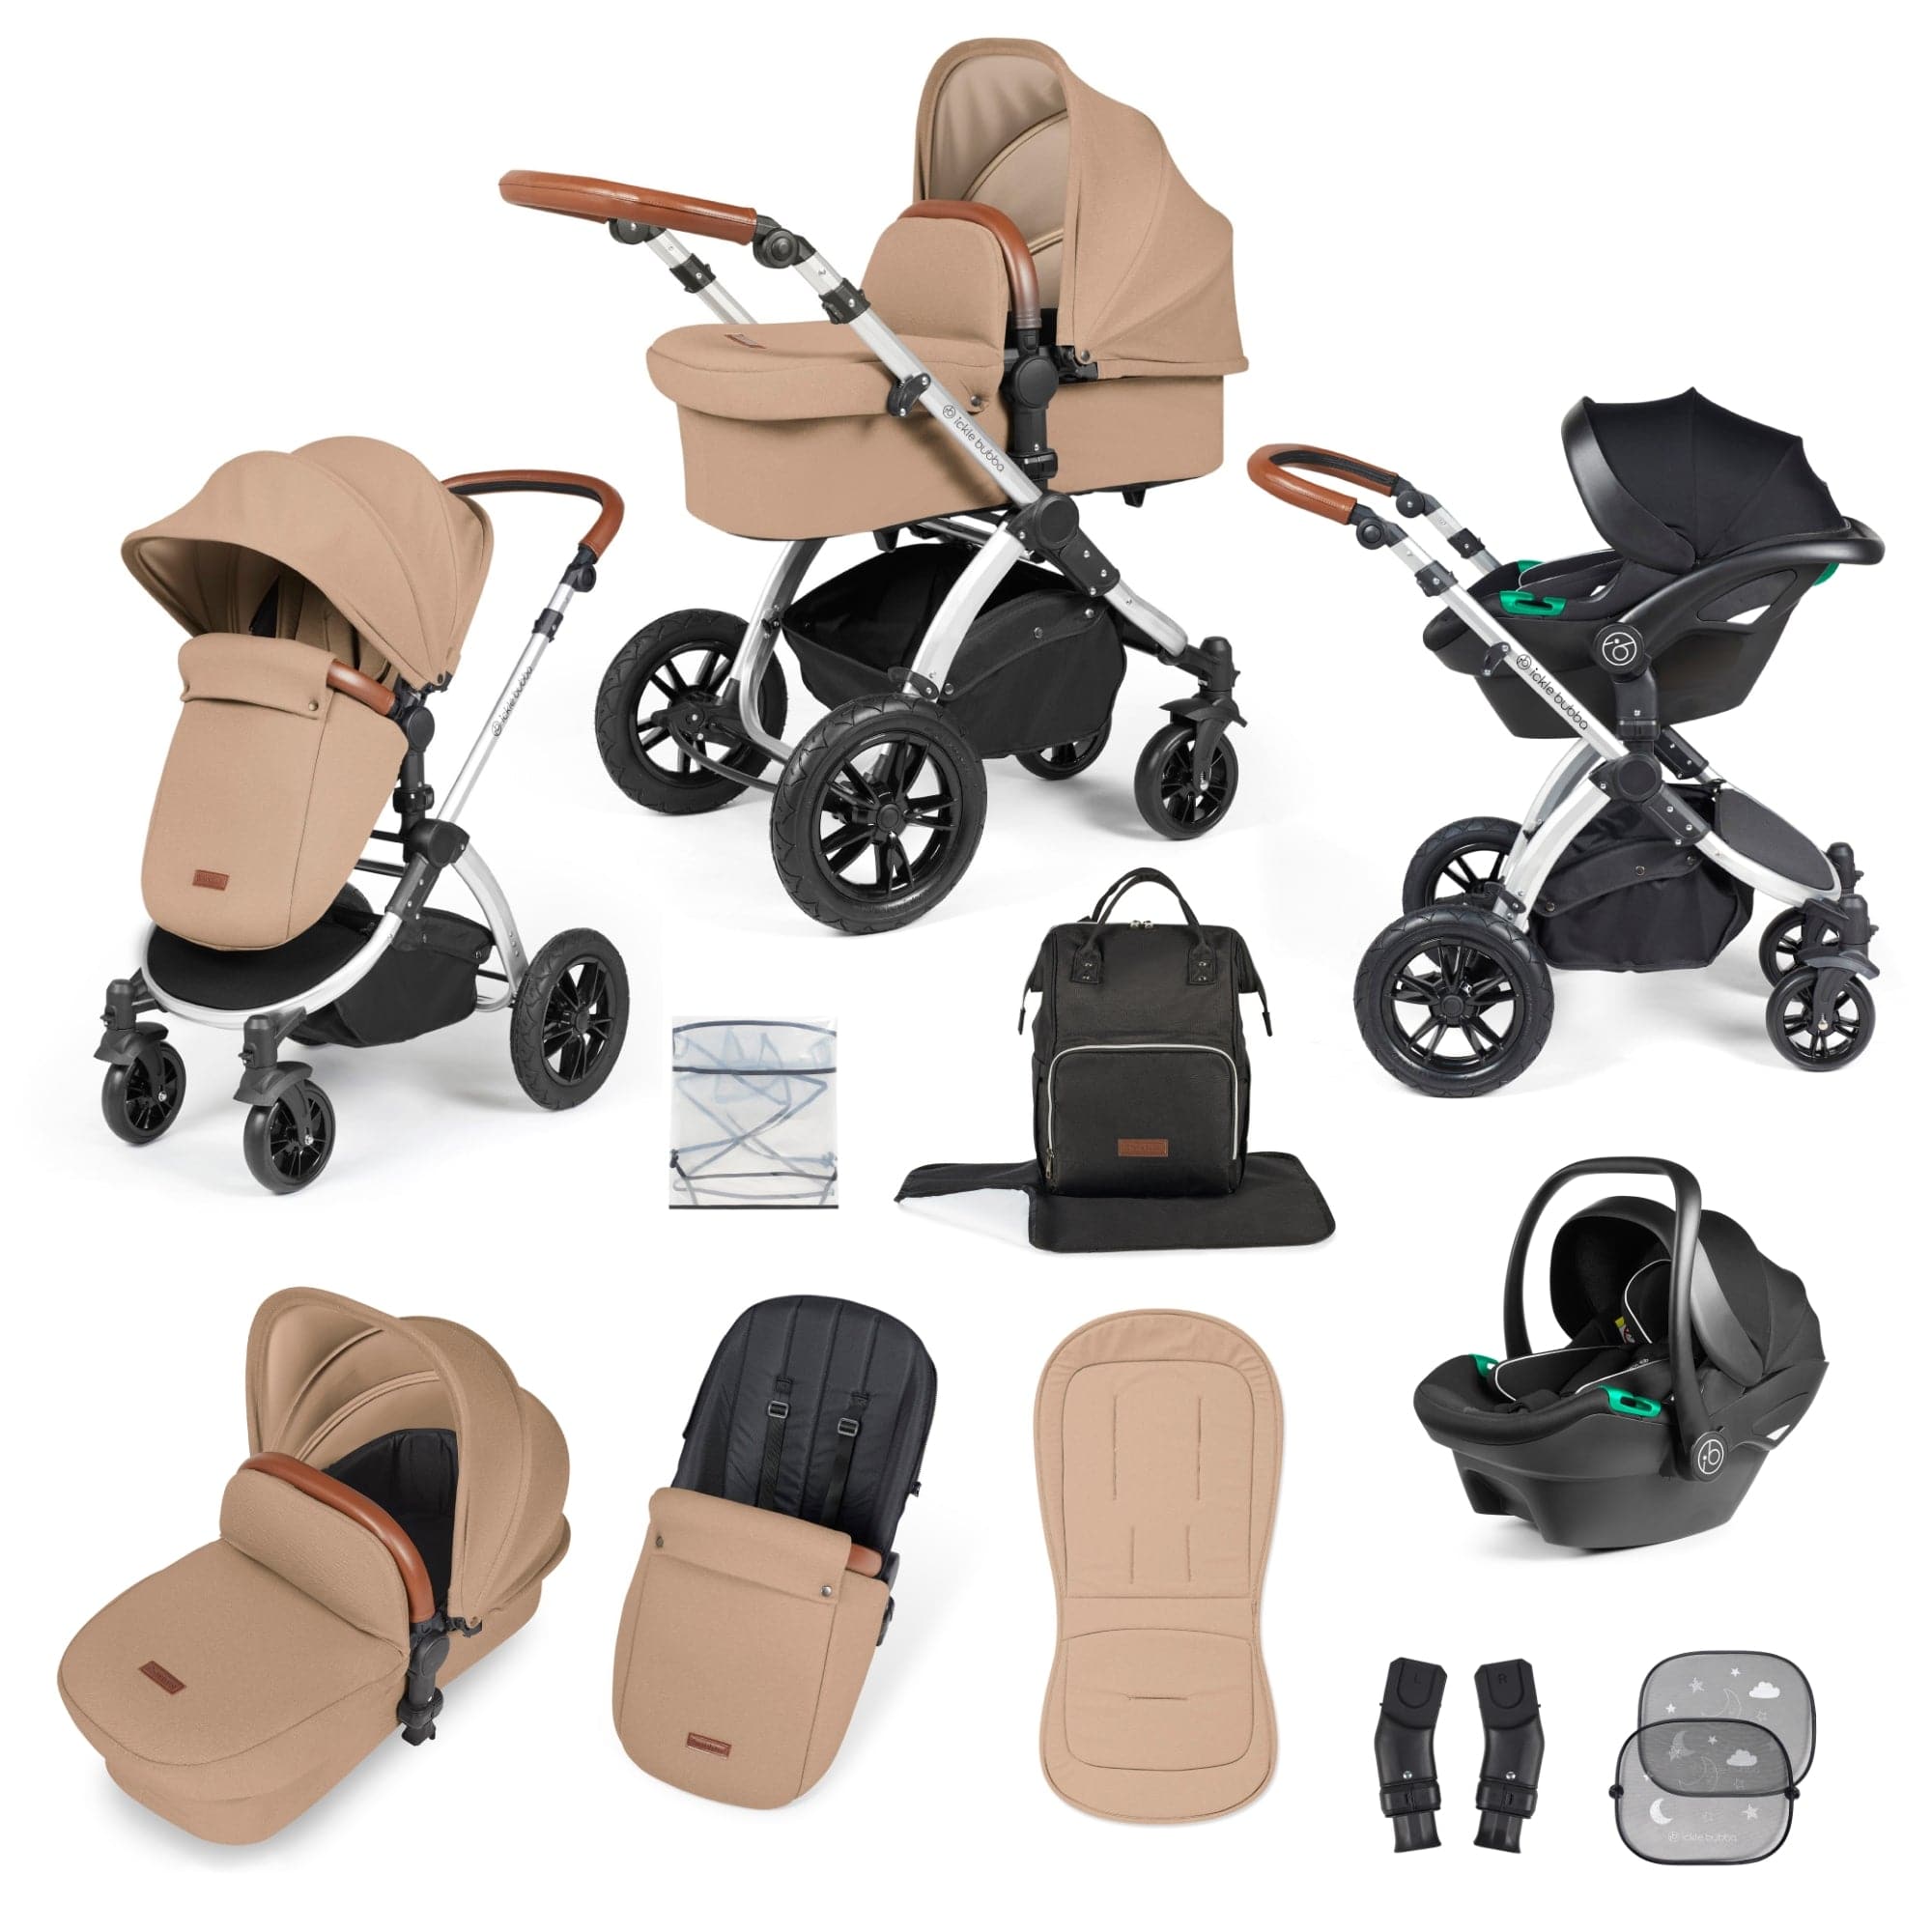 Ickle Bubba Stomp Luxe All-In-One I-Size Travel System With Isofix Base - Silver / Desert / Tan - For Your Little One